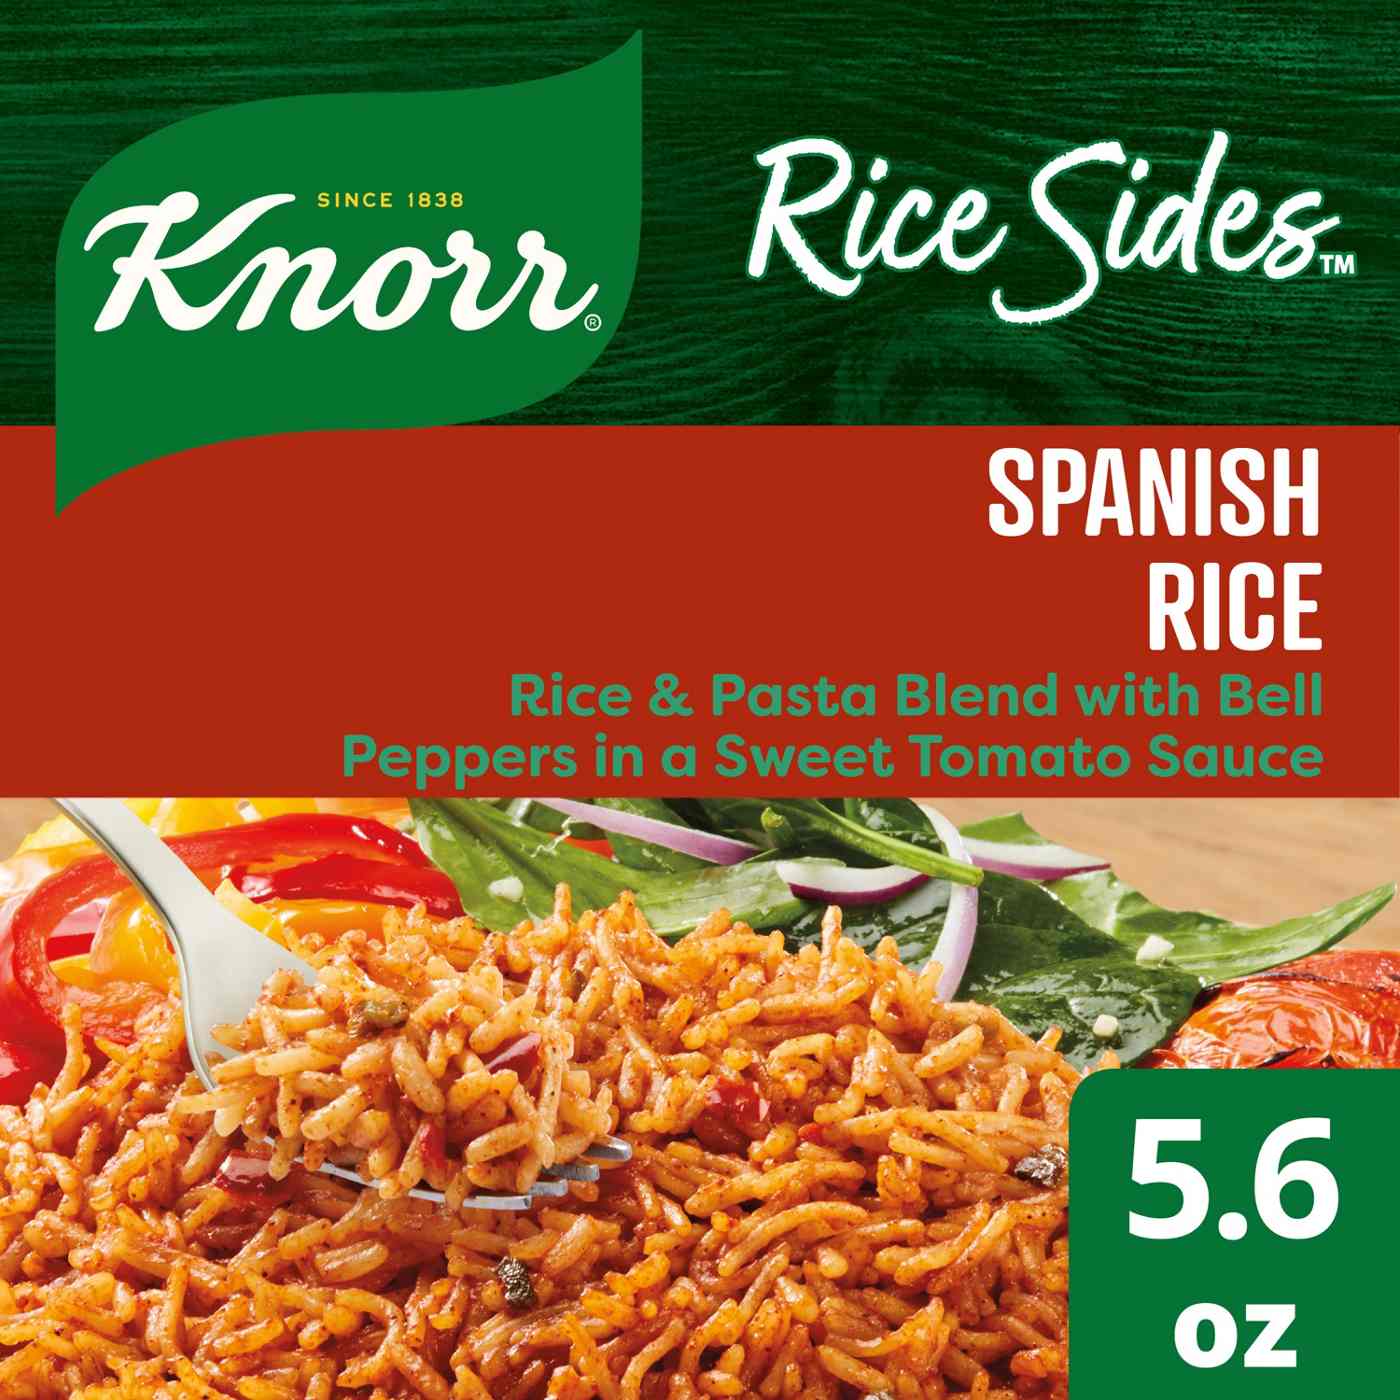 Knorr Rice Sides Spanish Rice; image 5 of 7